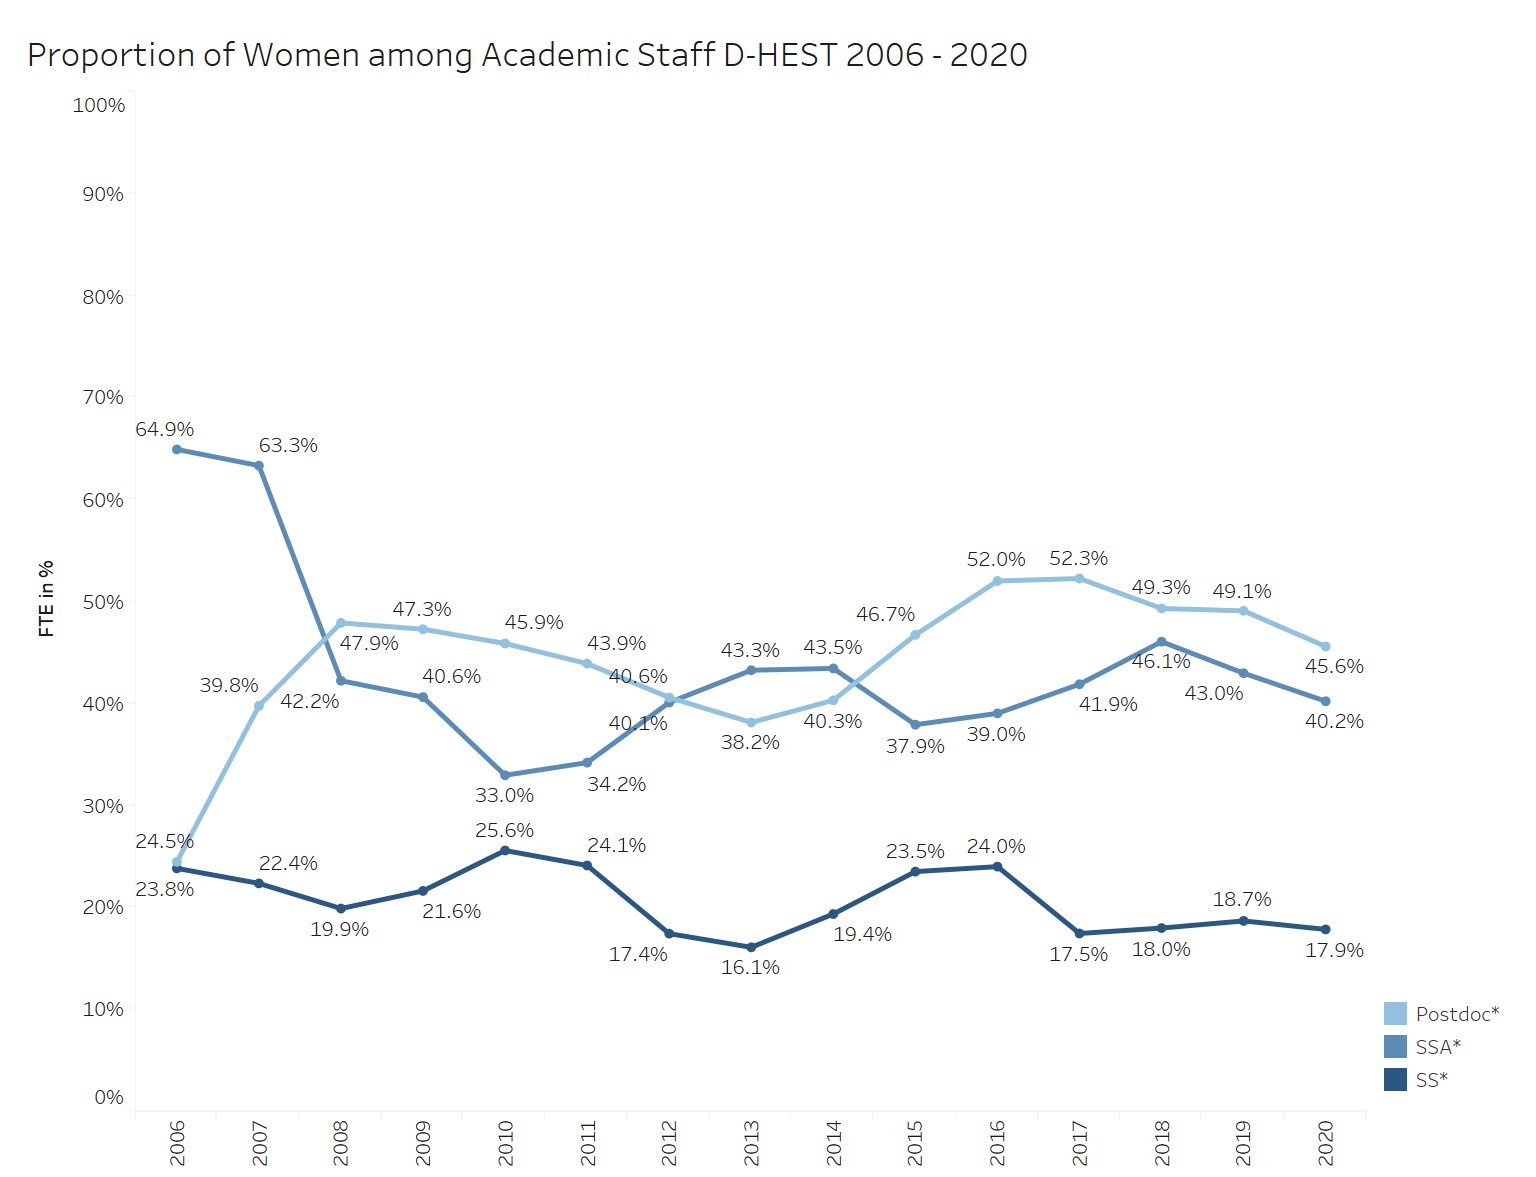 Proportion of Women among Academic Staff D-HEST 2006 - 2020